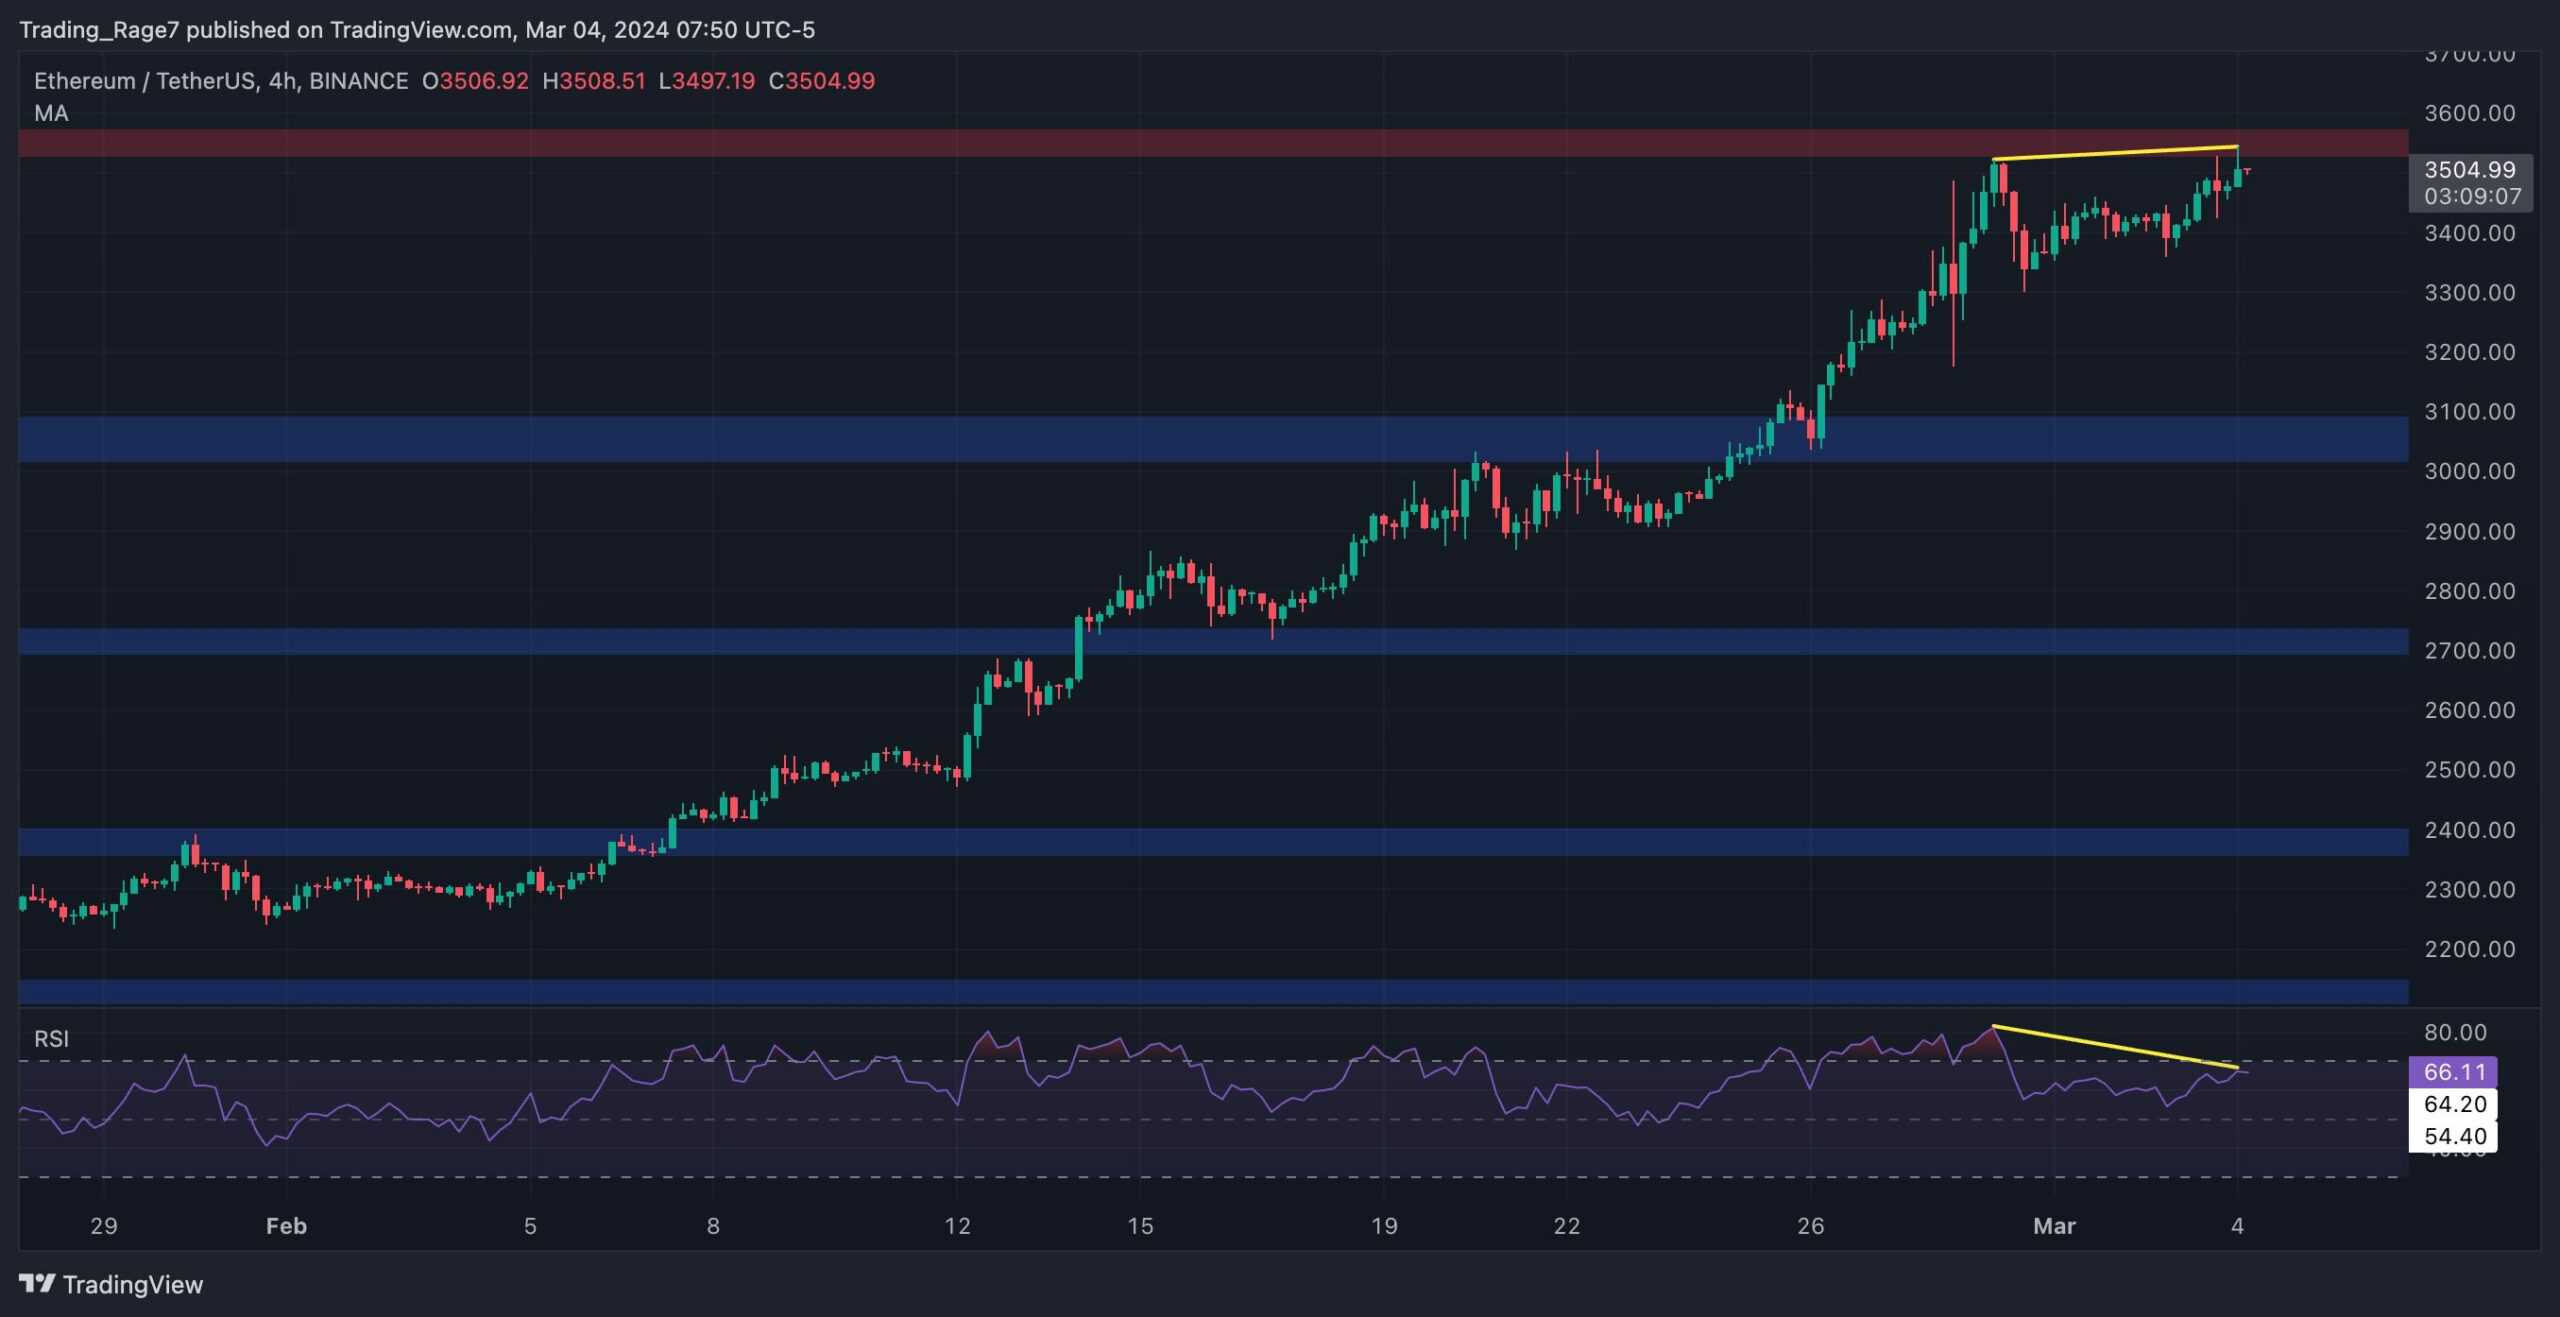 Will-eth-reach-$4k-this-week-or-are-bears-preparing-a-correction?-(ethereum-price-analysis)